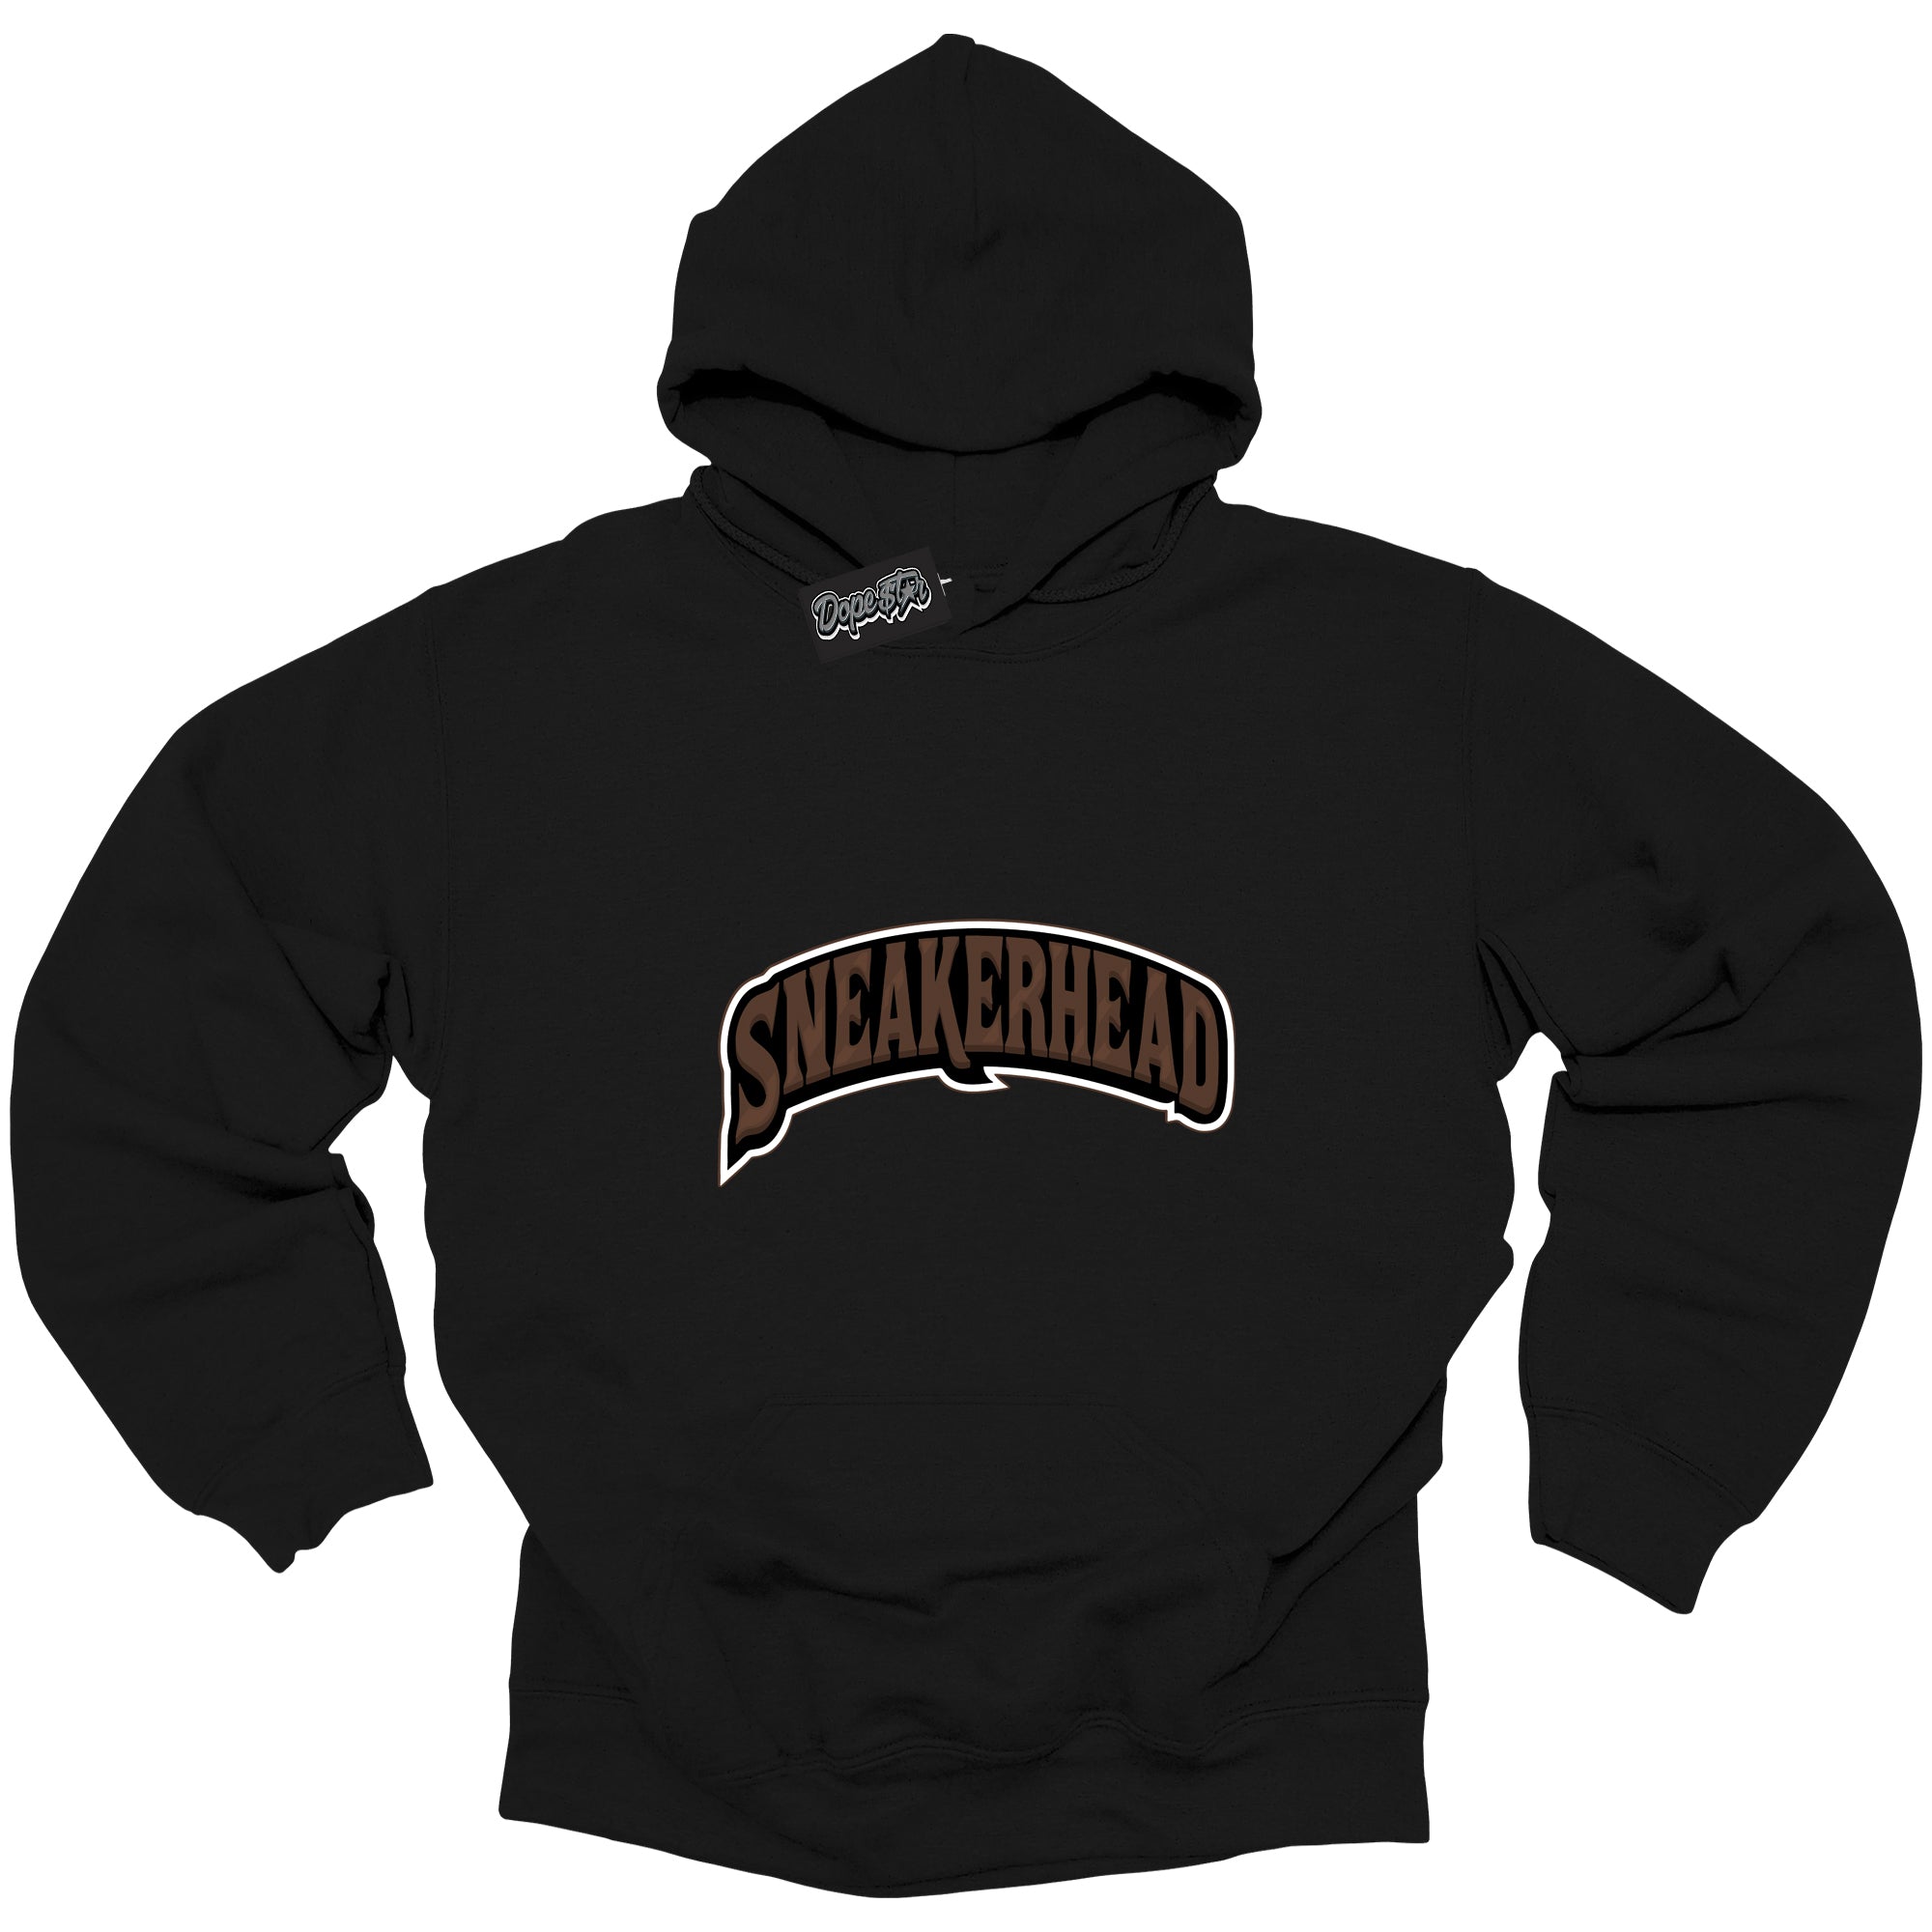 Cool Black Graphic DopeStar Hoodie with “ Sneakerhead “ print, that perfectly matches Palomino 1s sneakers